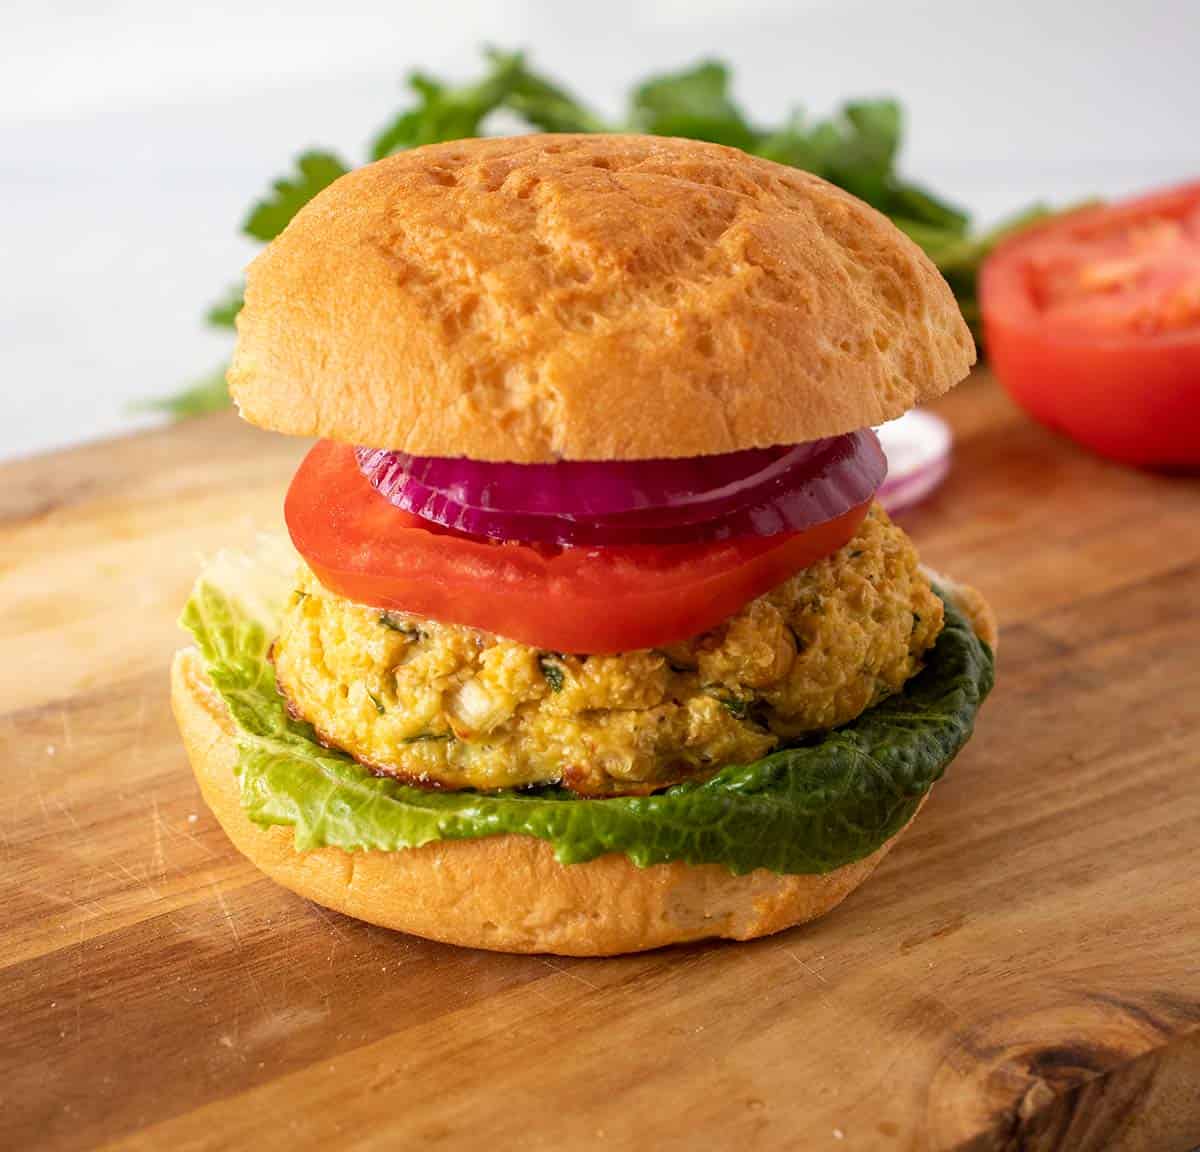 Chickpea burgers on a bun topped with lettuce, tomato, and red onion.